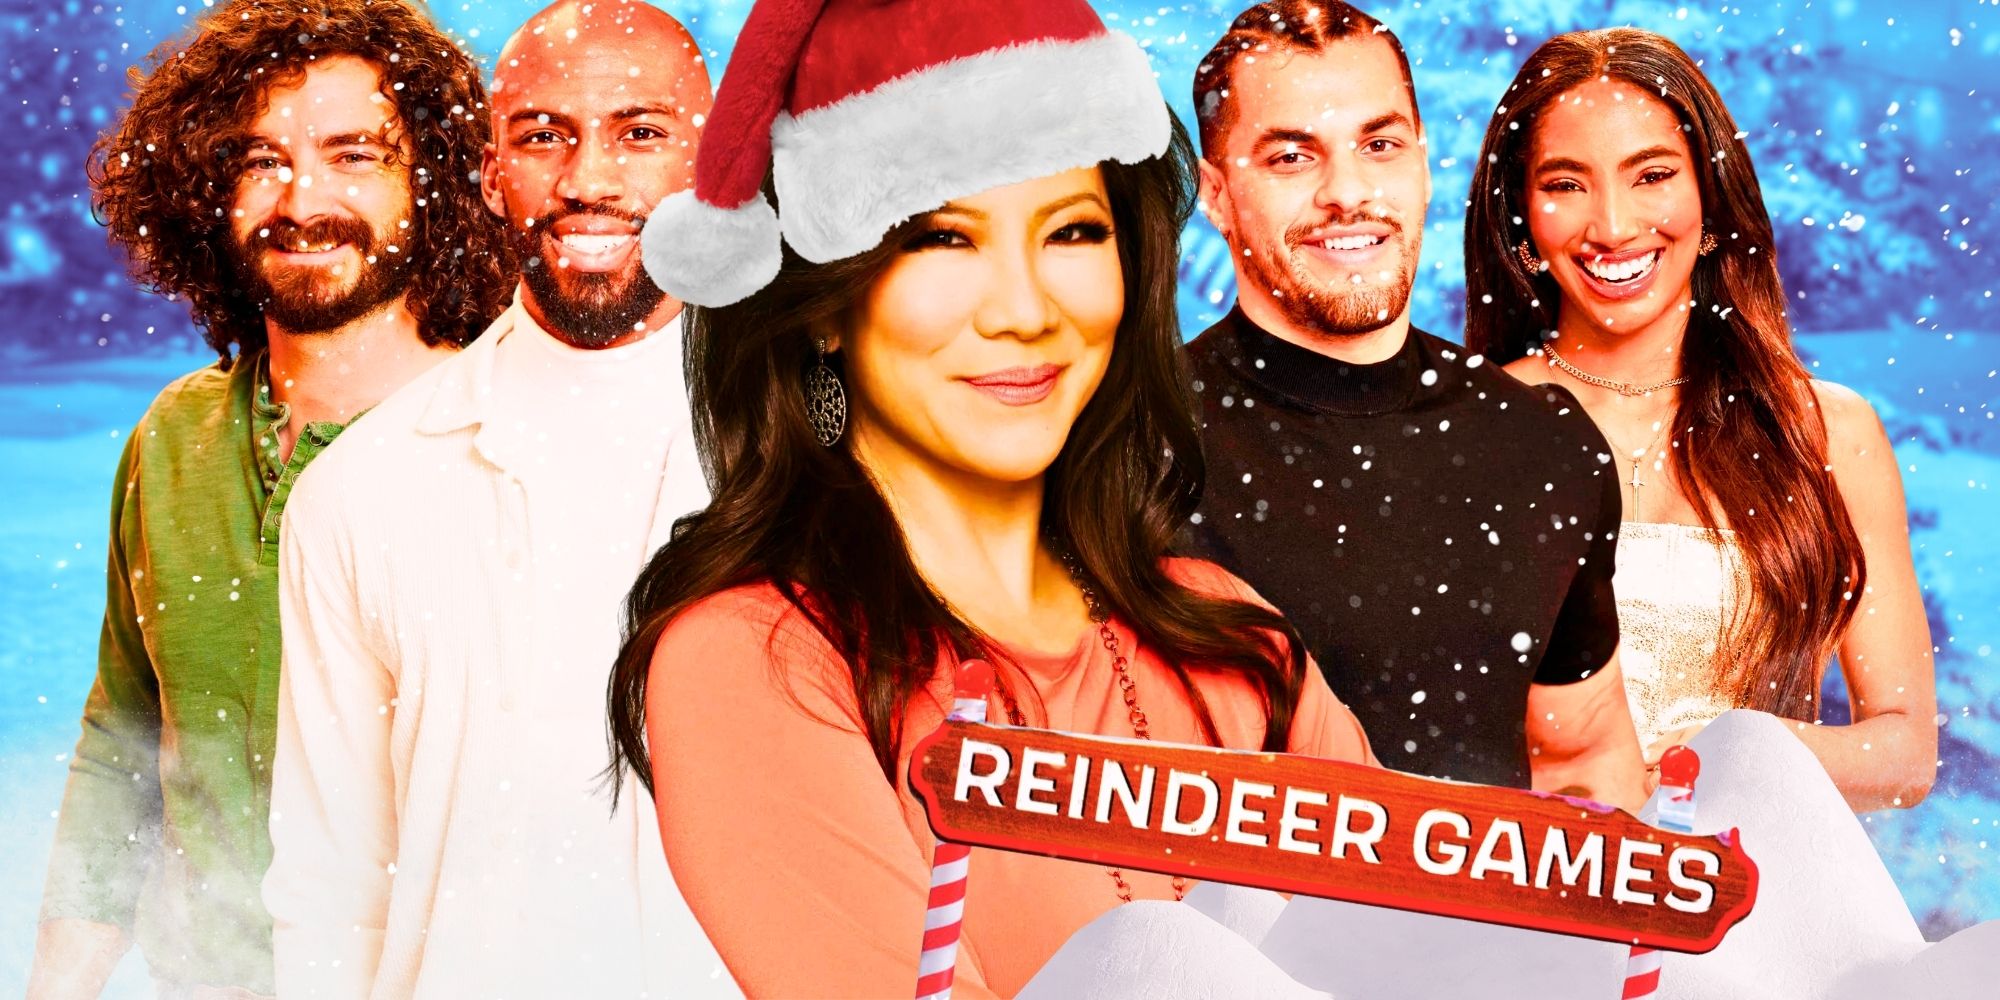 Big Brother Reindeer Games Won’t Tarnish Players’ Legacies For This